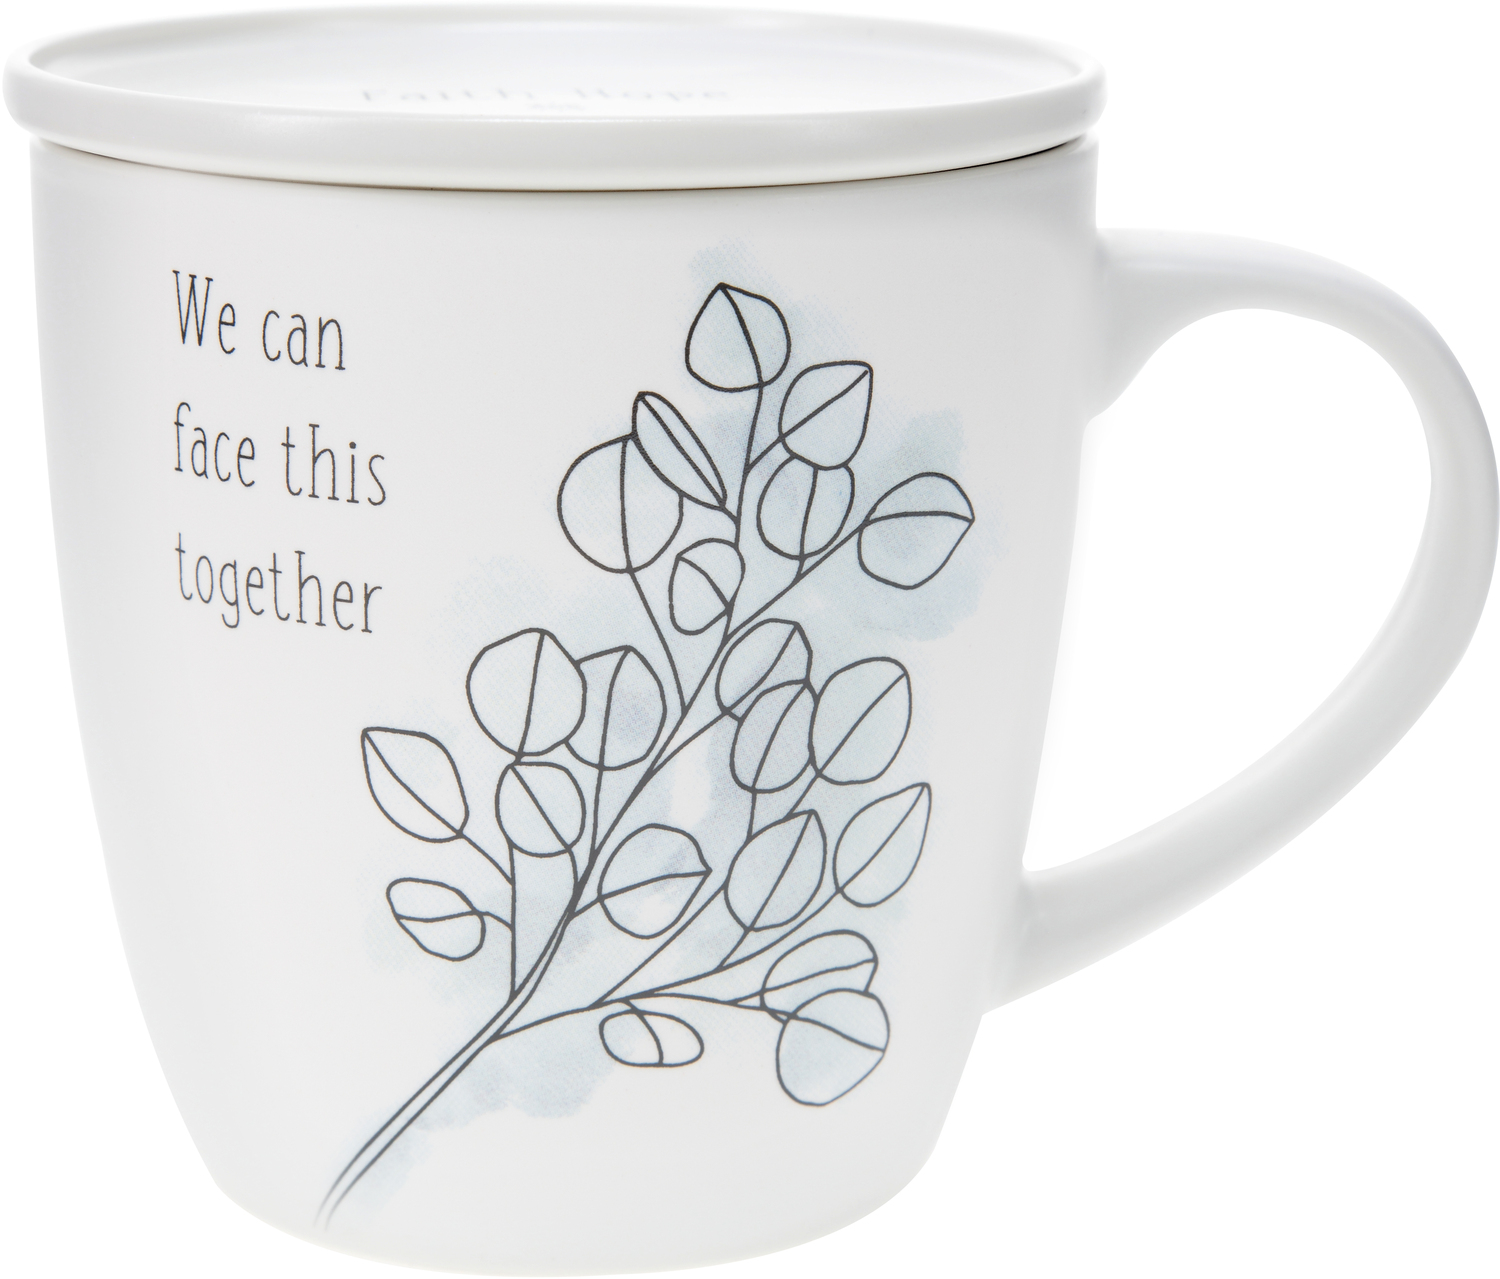 Face This Together by Faith Hope and Healing - Face This Together - 17 oz Cup with Coaster Lid